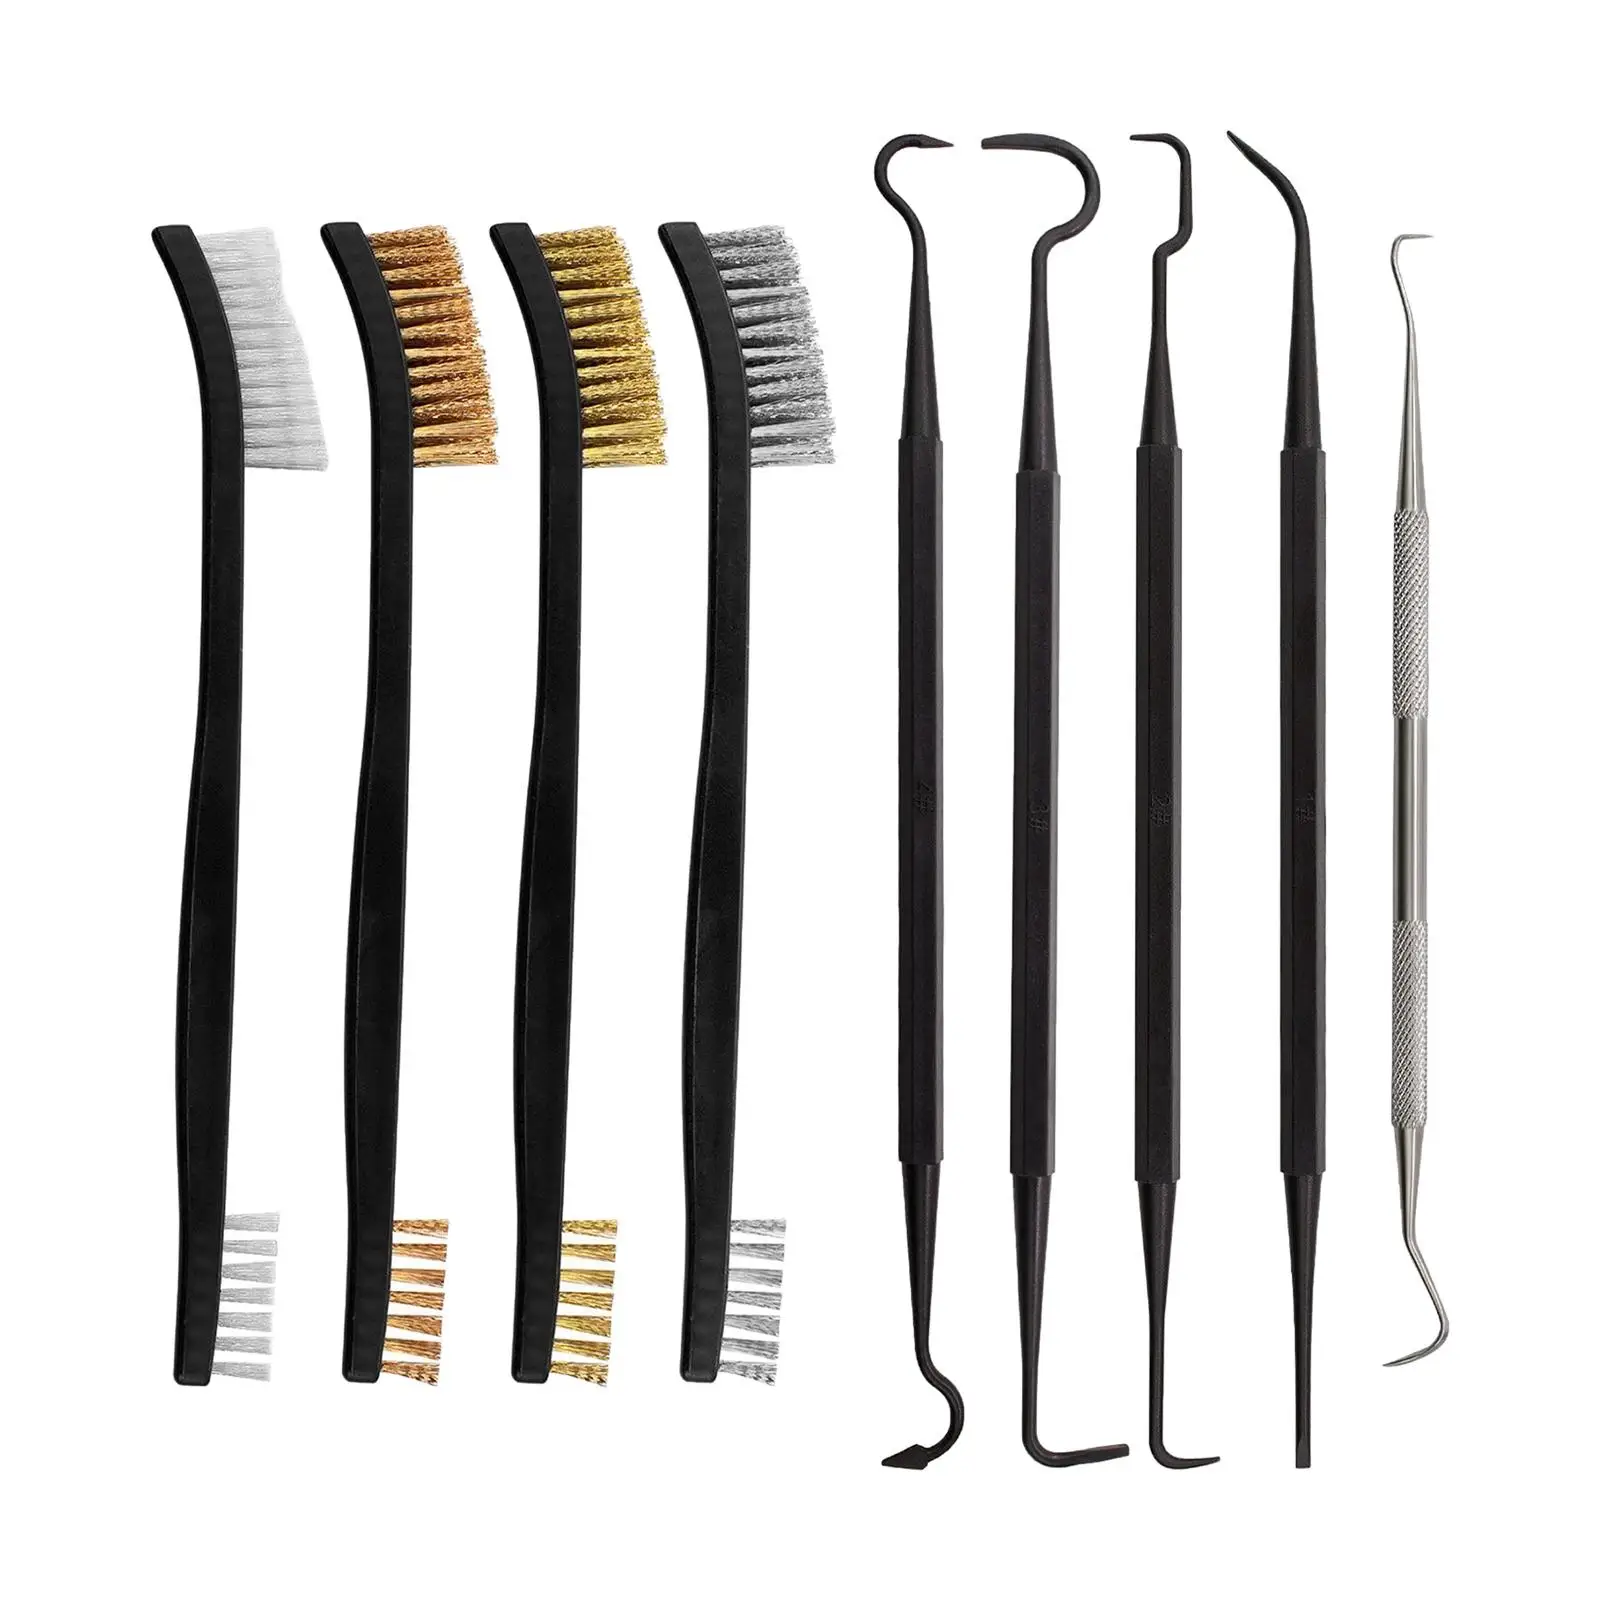 Car Detailing Cleaning Tool Hooks and Brush Set for Mechanical Cleaning